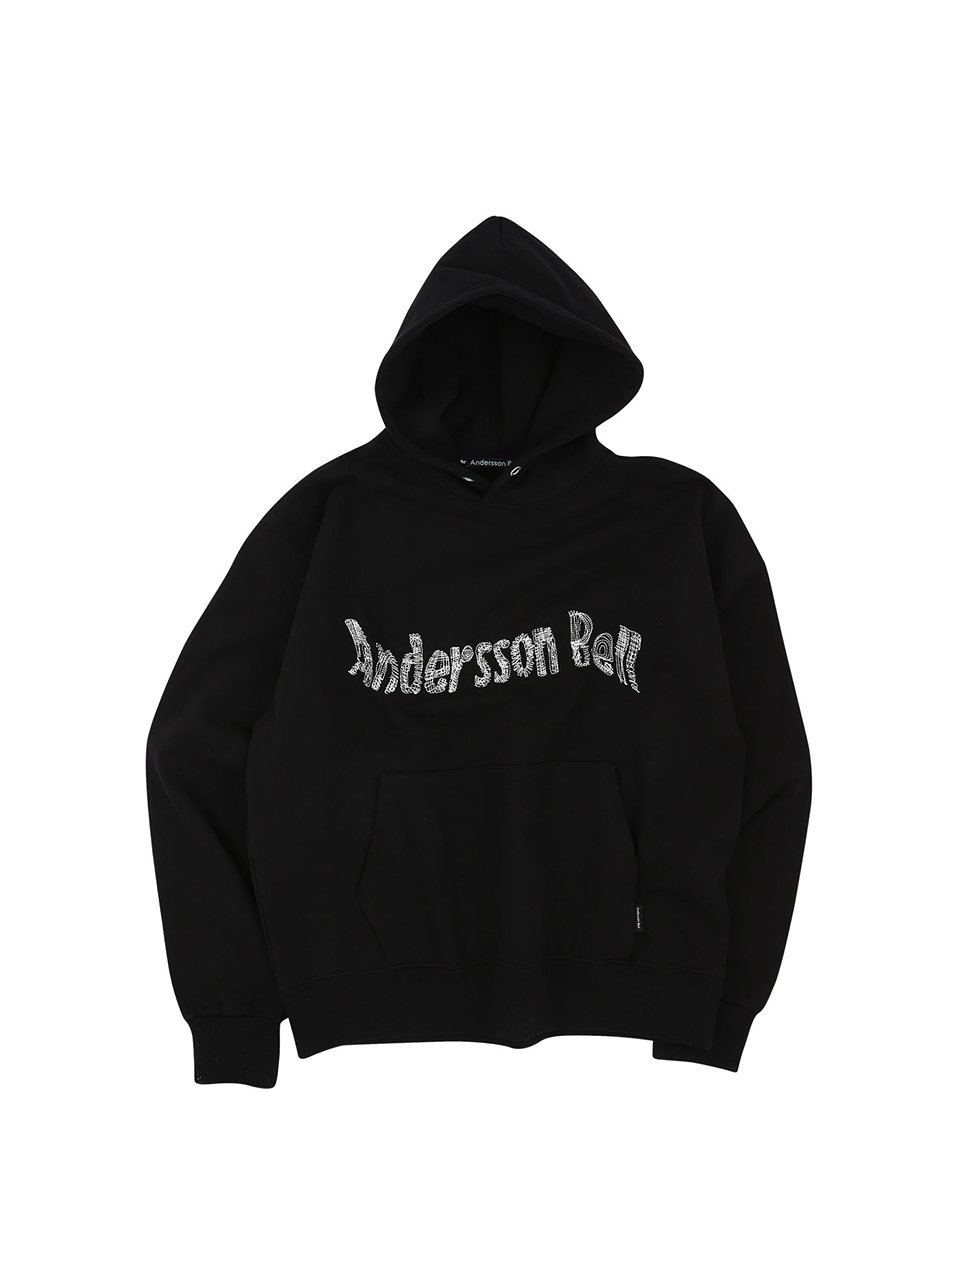 ANDERSSON BELL - UNISEX NEW AB LOGO EMBROIDERY HOODIE (BLACK)